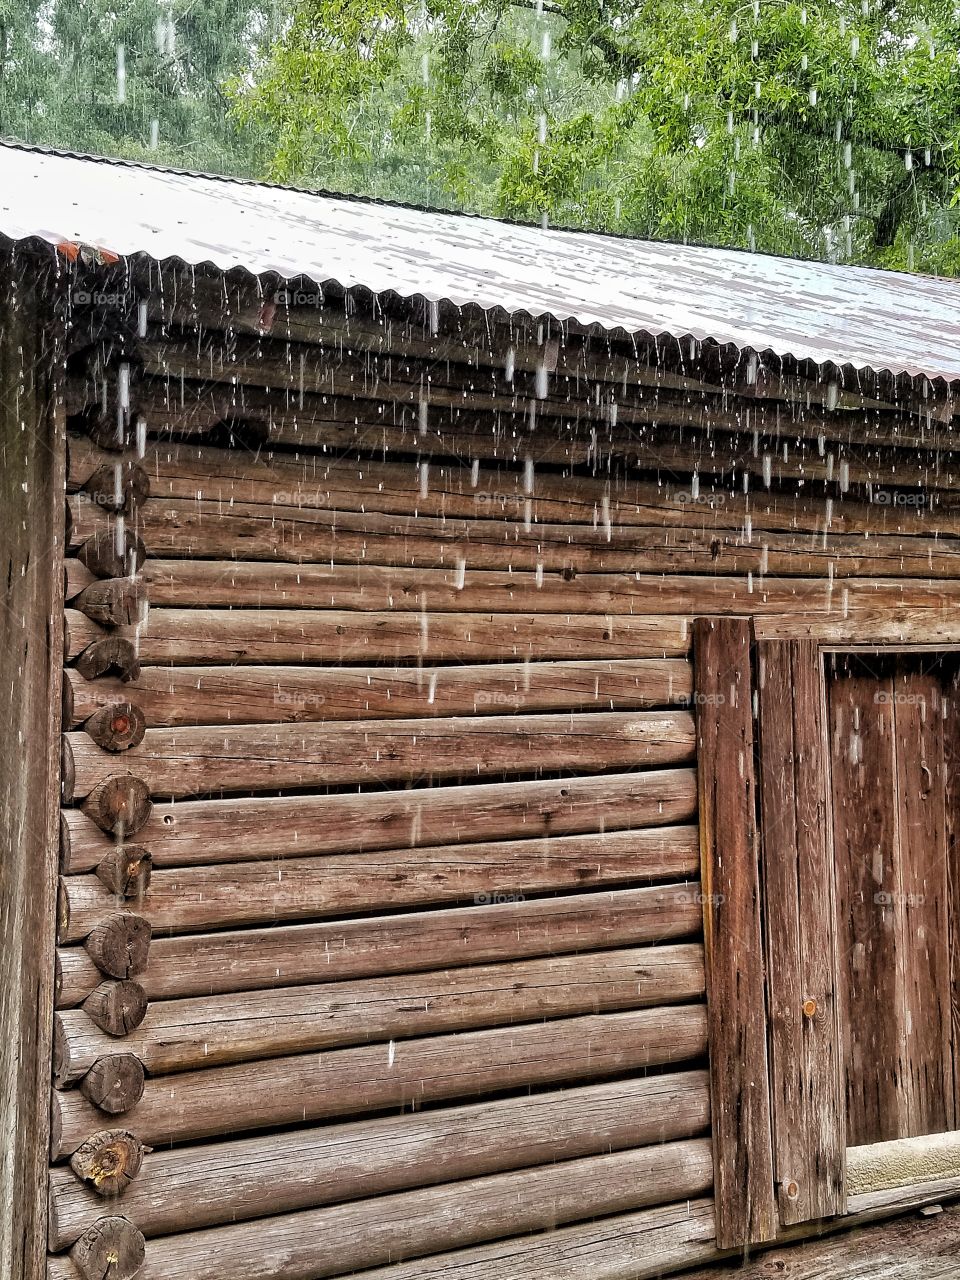 The sound of rain hitting a very, very old tin roof on a mid 1800's log cabin Louisiana